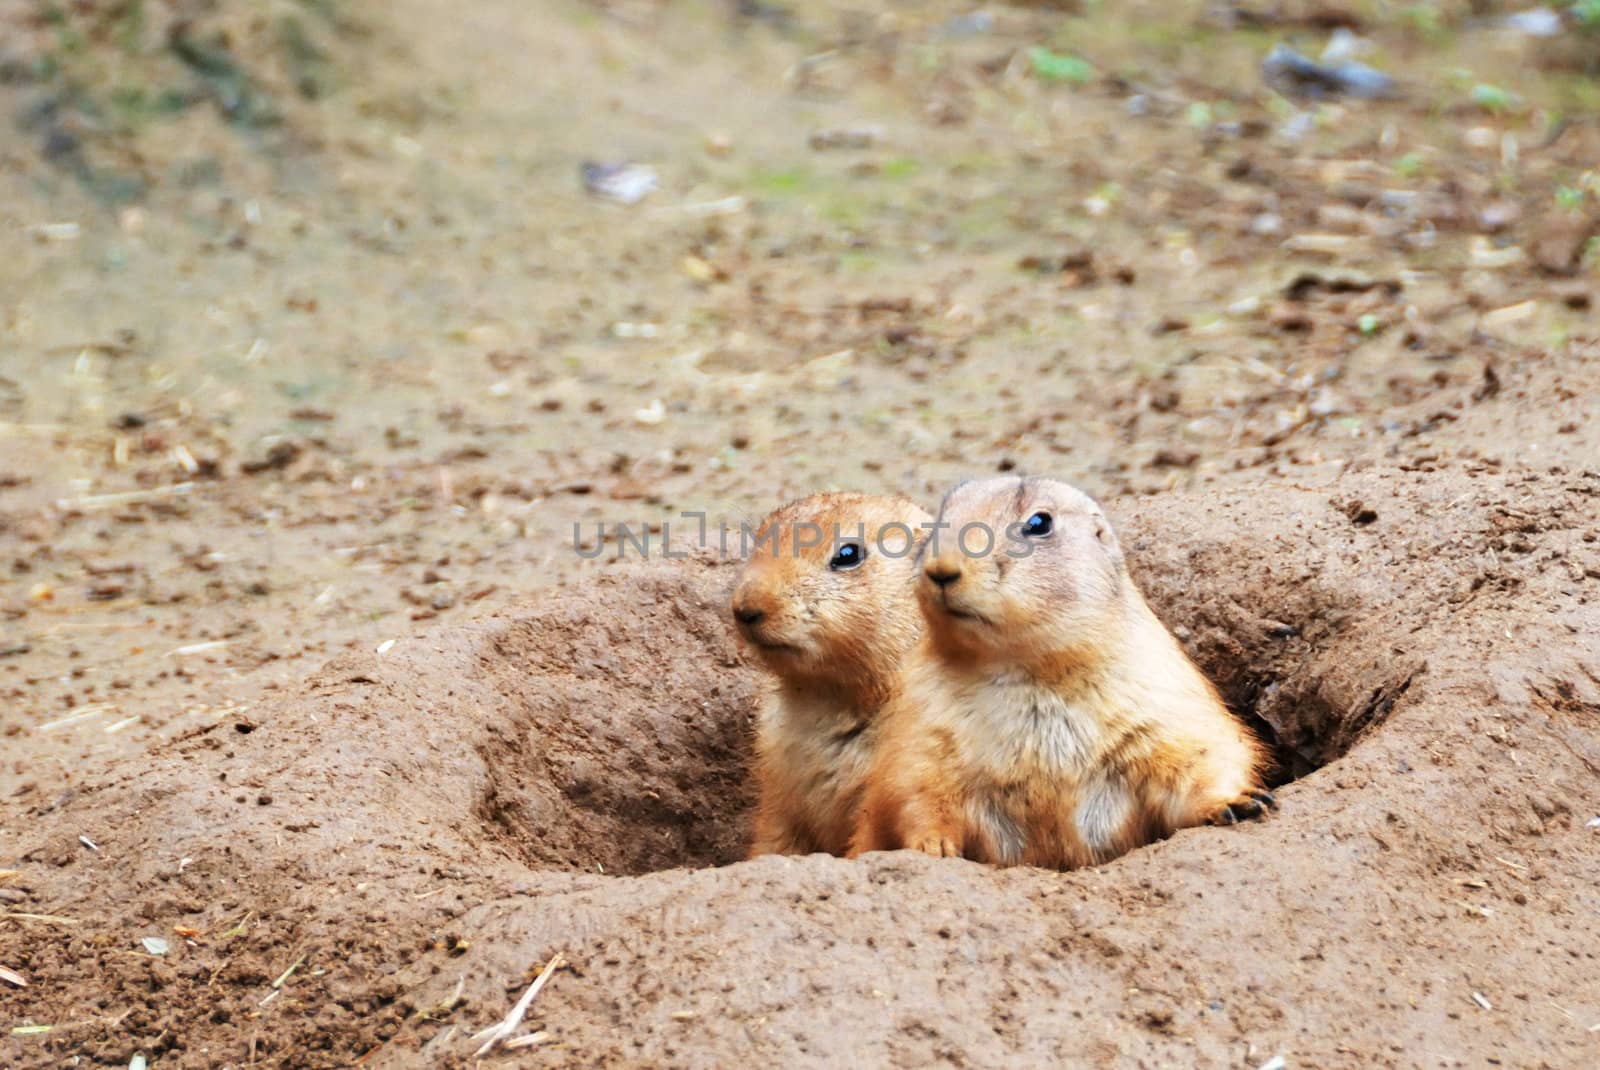 Two black-tailed prairie dogs - Cynomys ludovicianus - sticking out from a burrow.